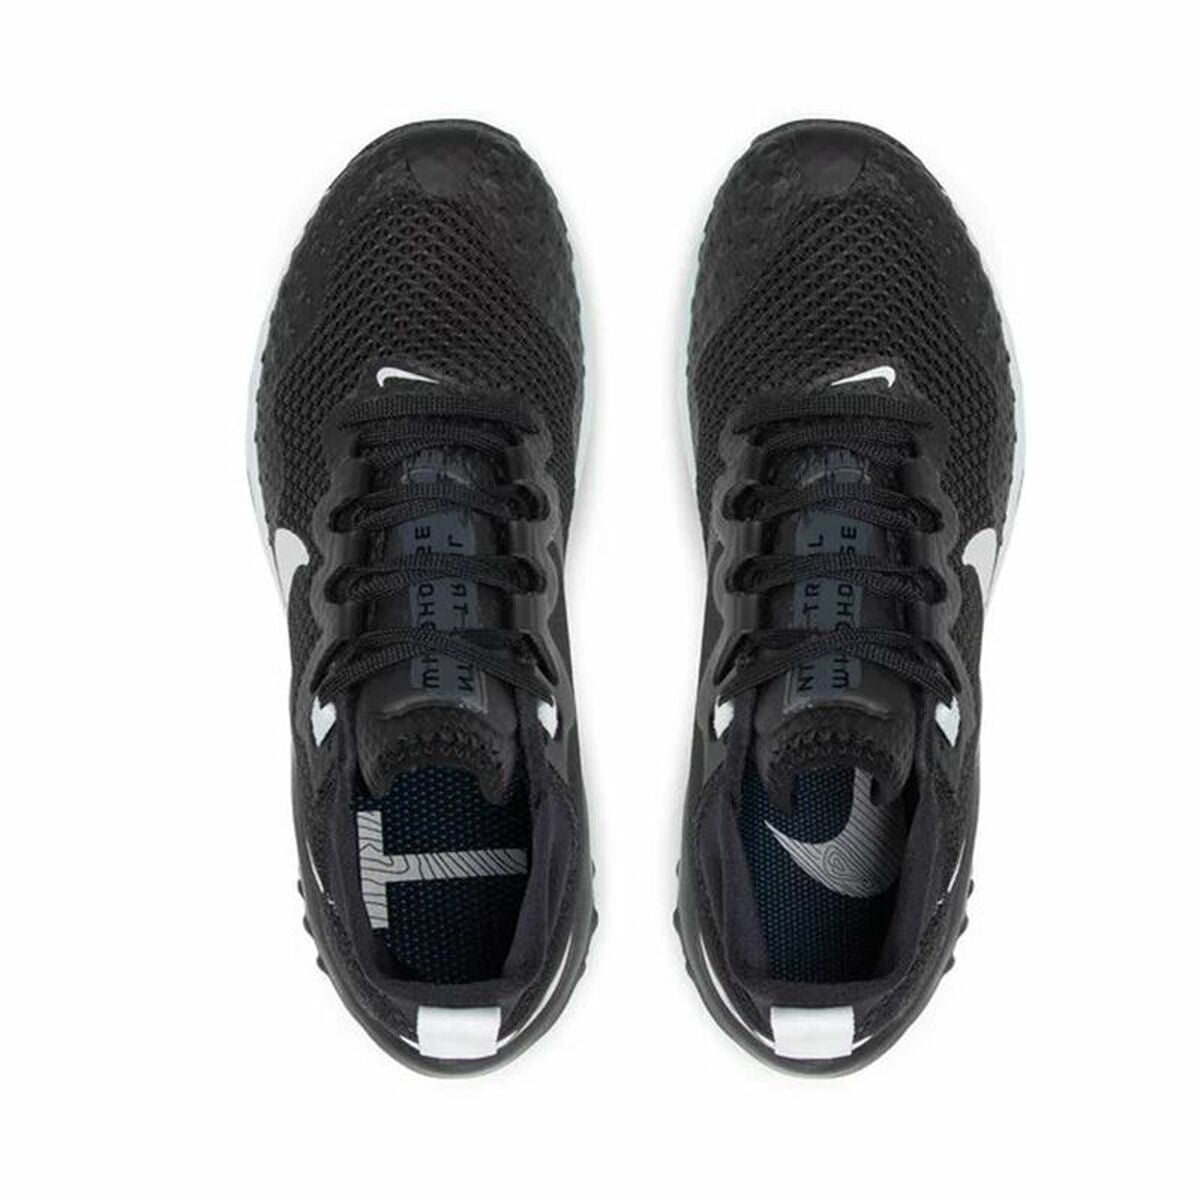 Running Shoes for Adults Nike Wildhorse 7 Black